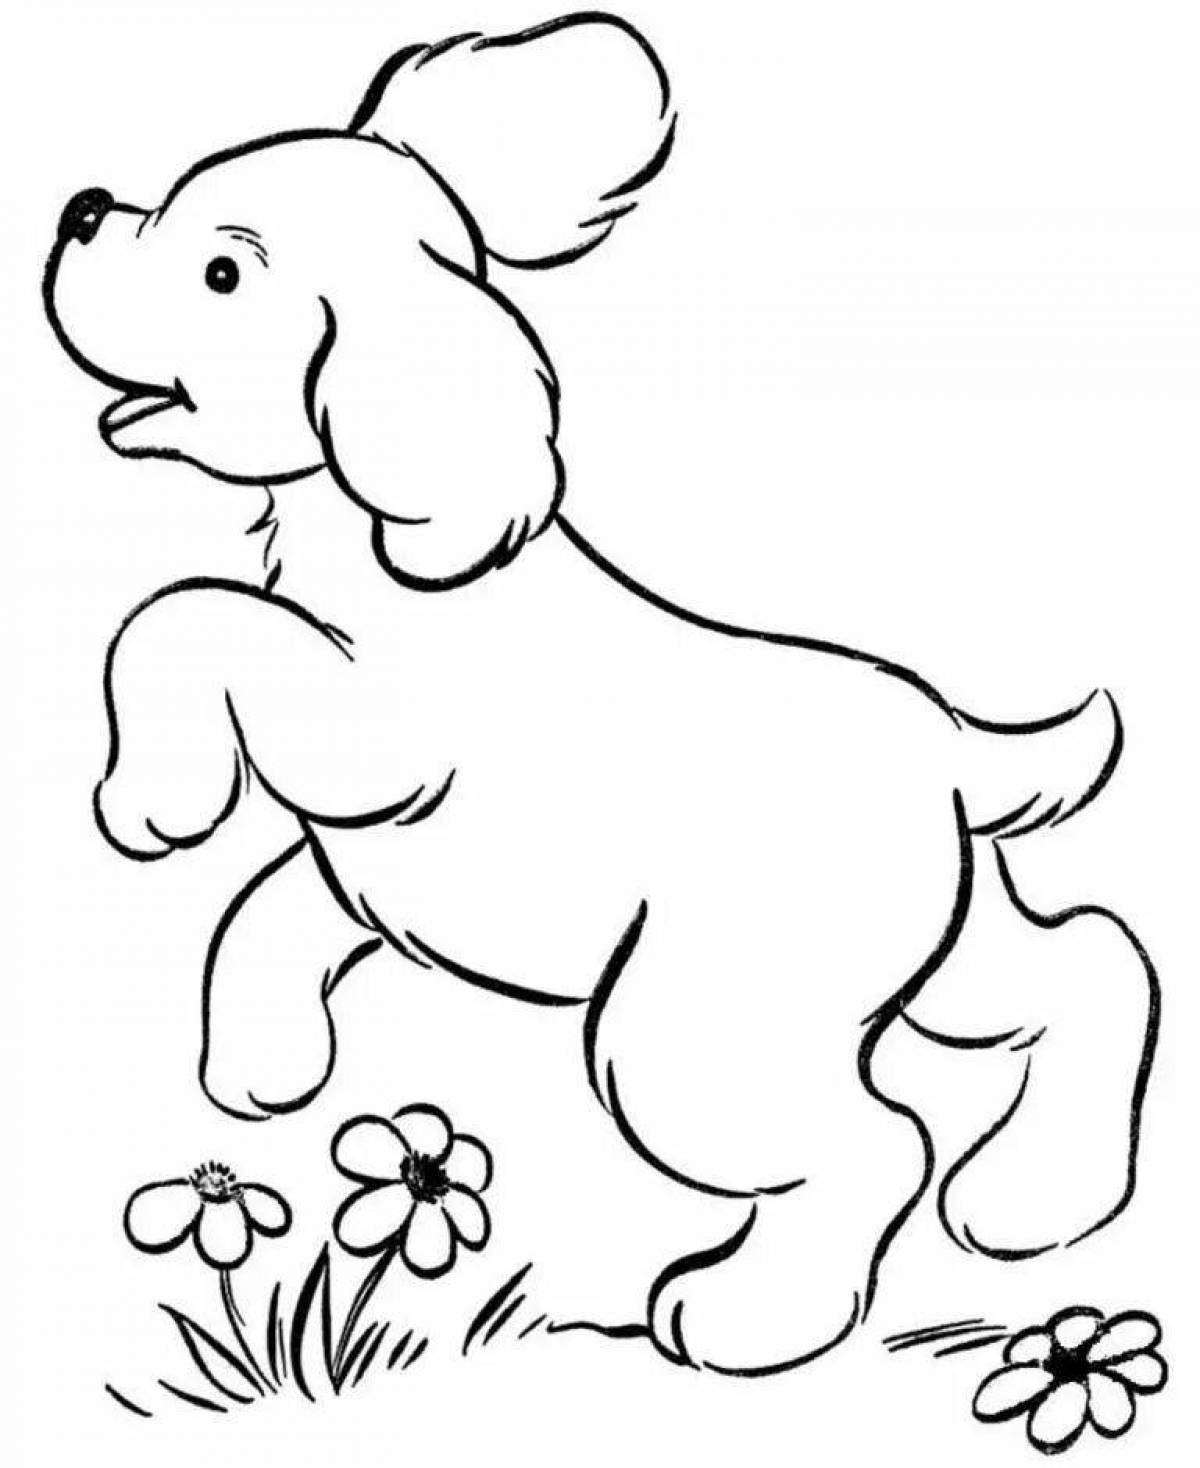 Fluffy puppy coloring book for kids